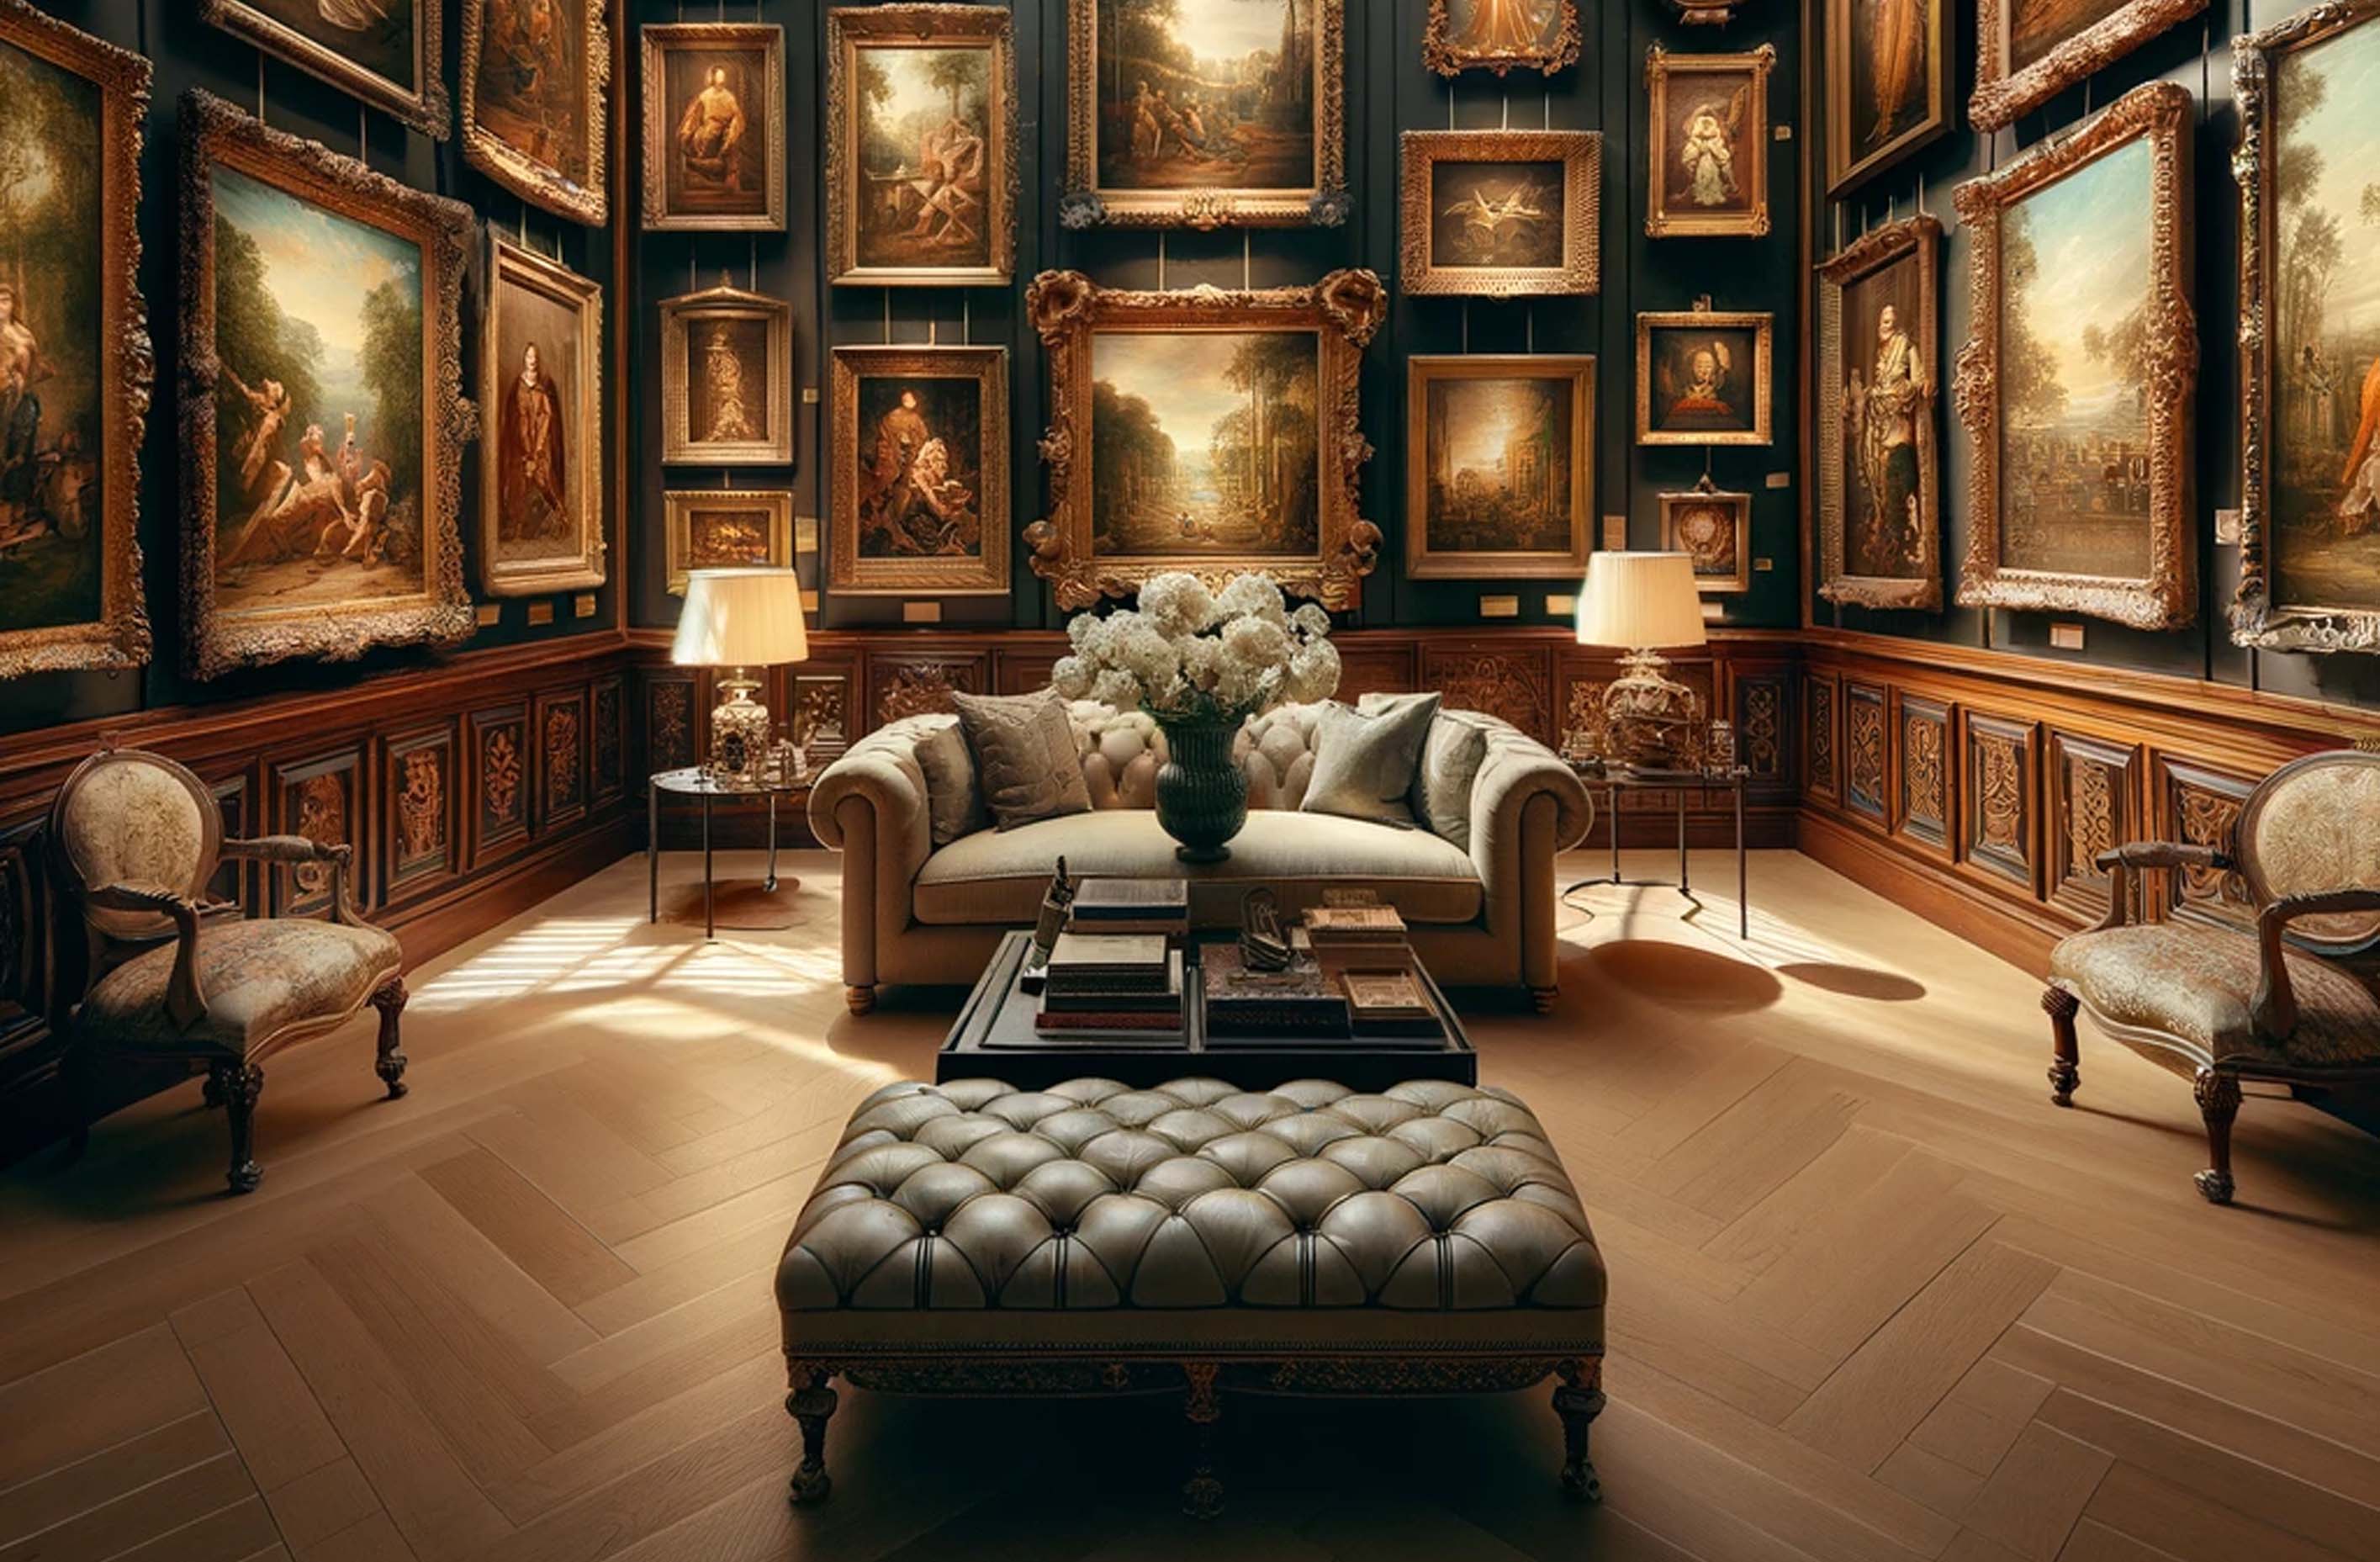 Carbon Heritage the art and fine art collectors room